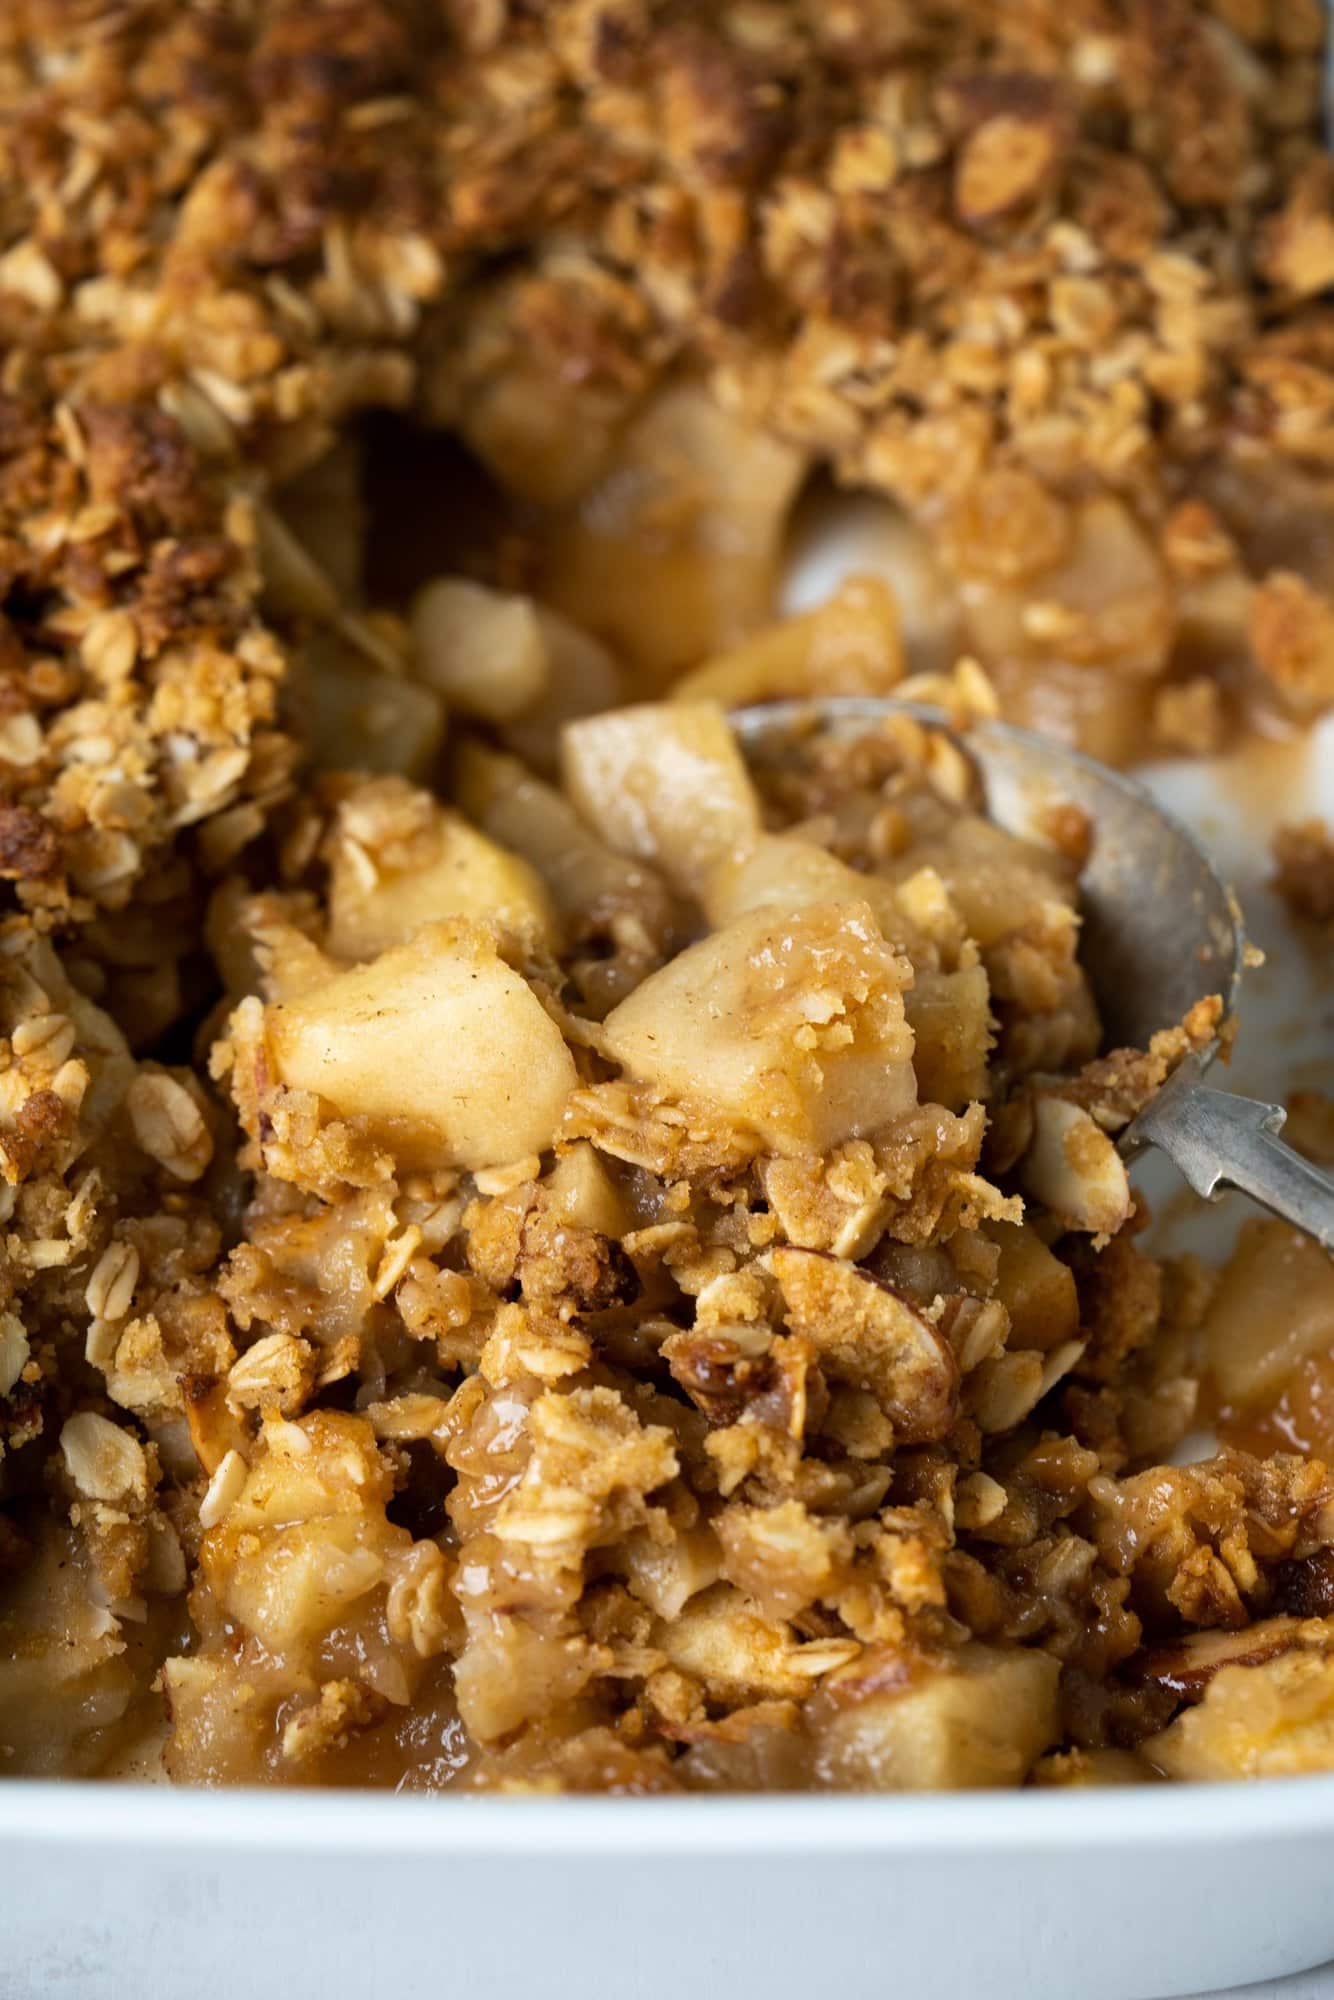 Close up image showing crispy oats, almond flakes and cooked apples in apple crisp